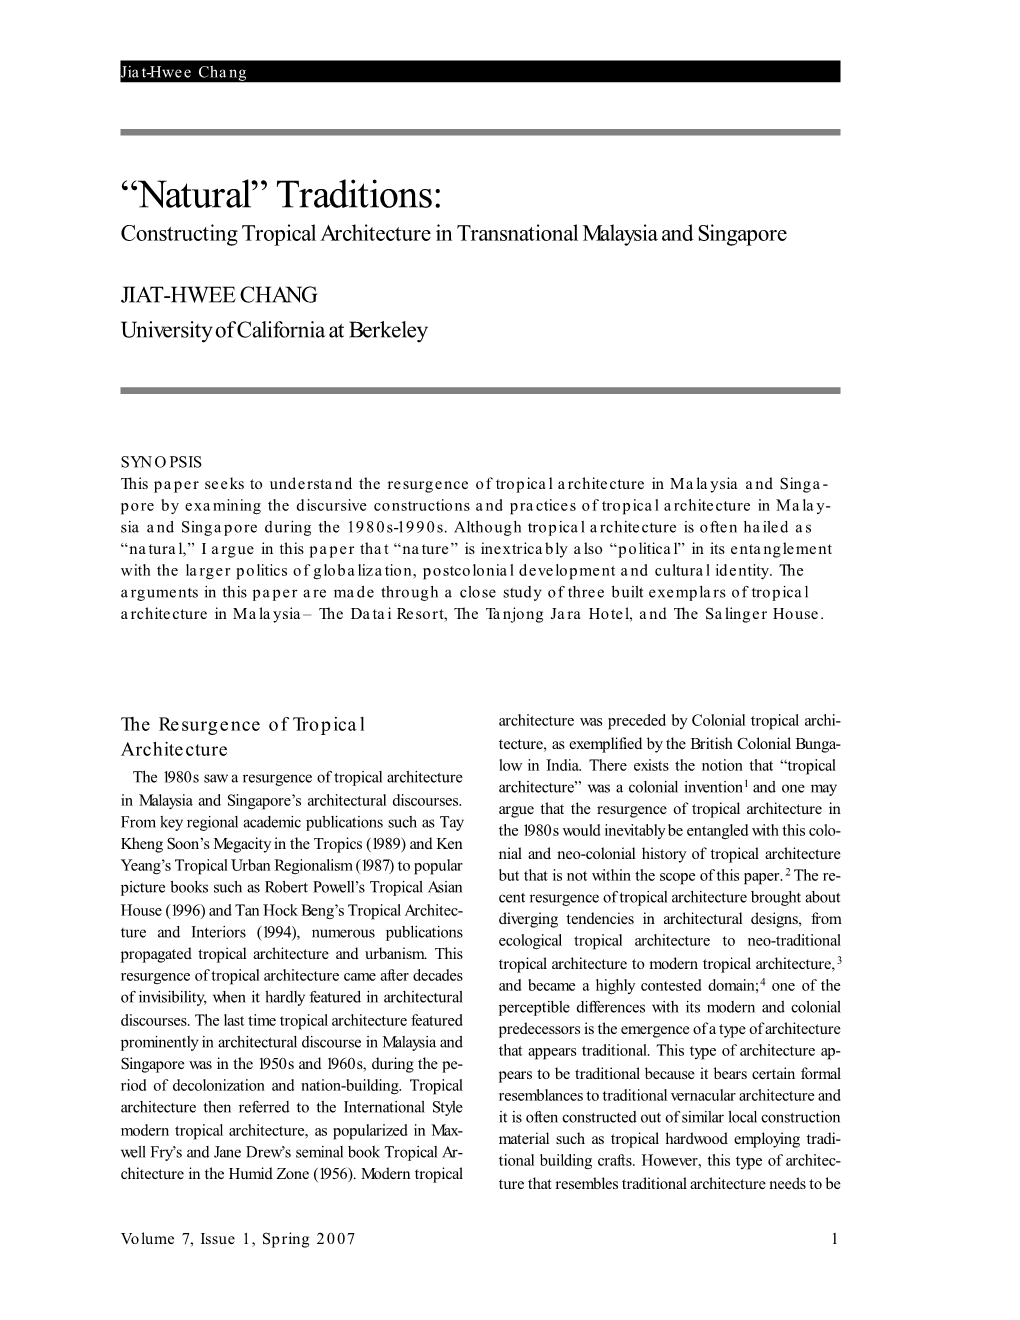 “ Natural ” Traditions : Constructing Tropical Architecture in Transnational Malaysia and Singapore